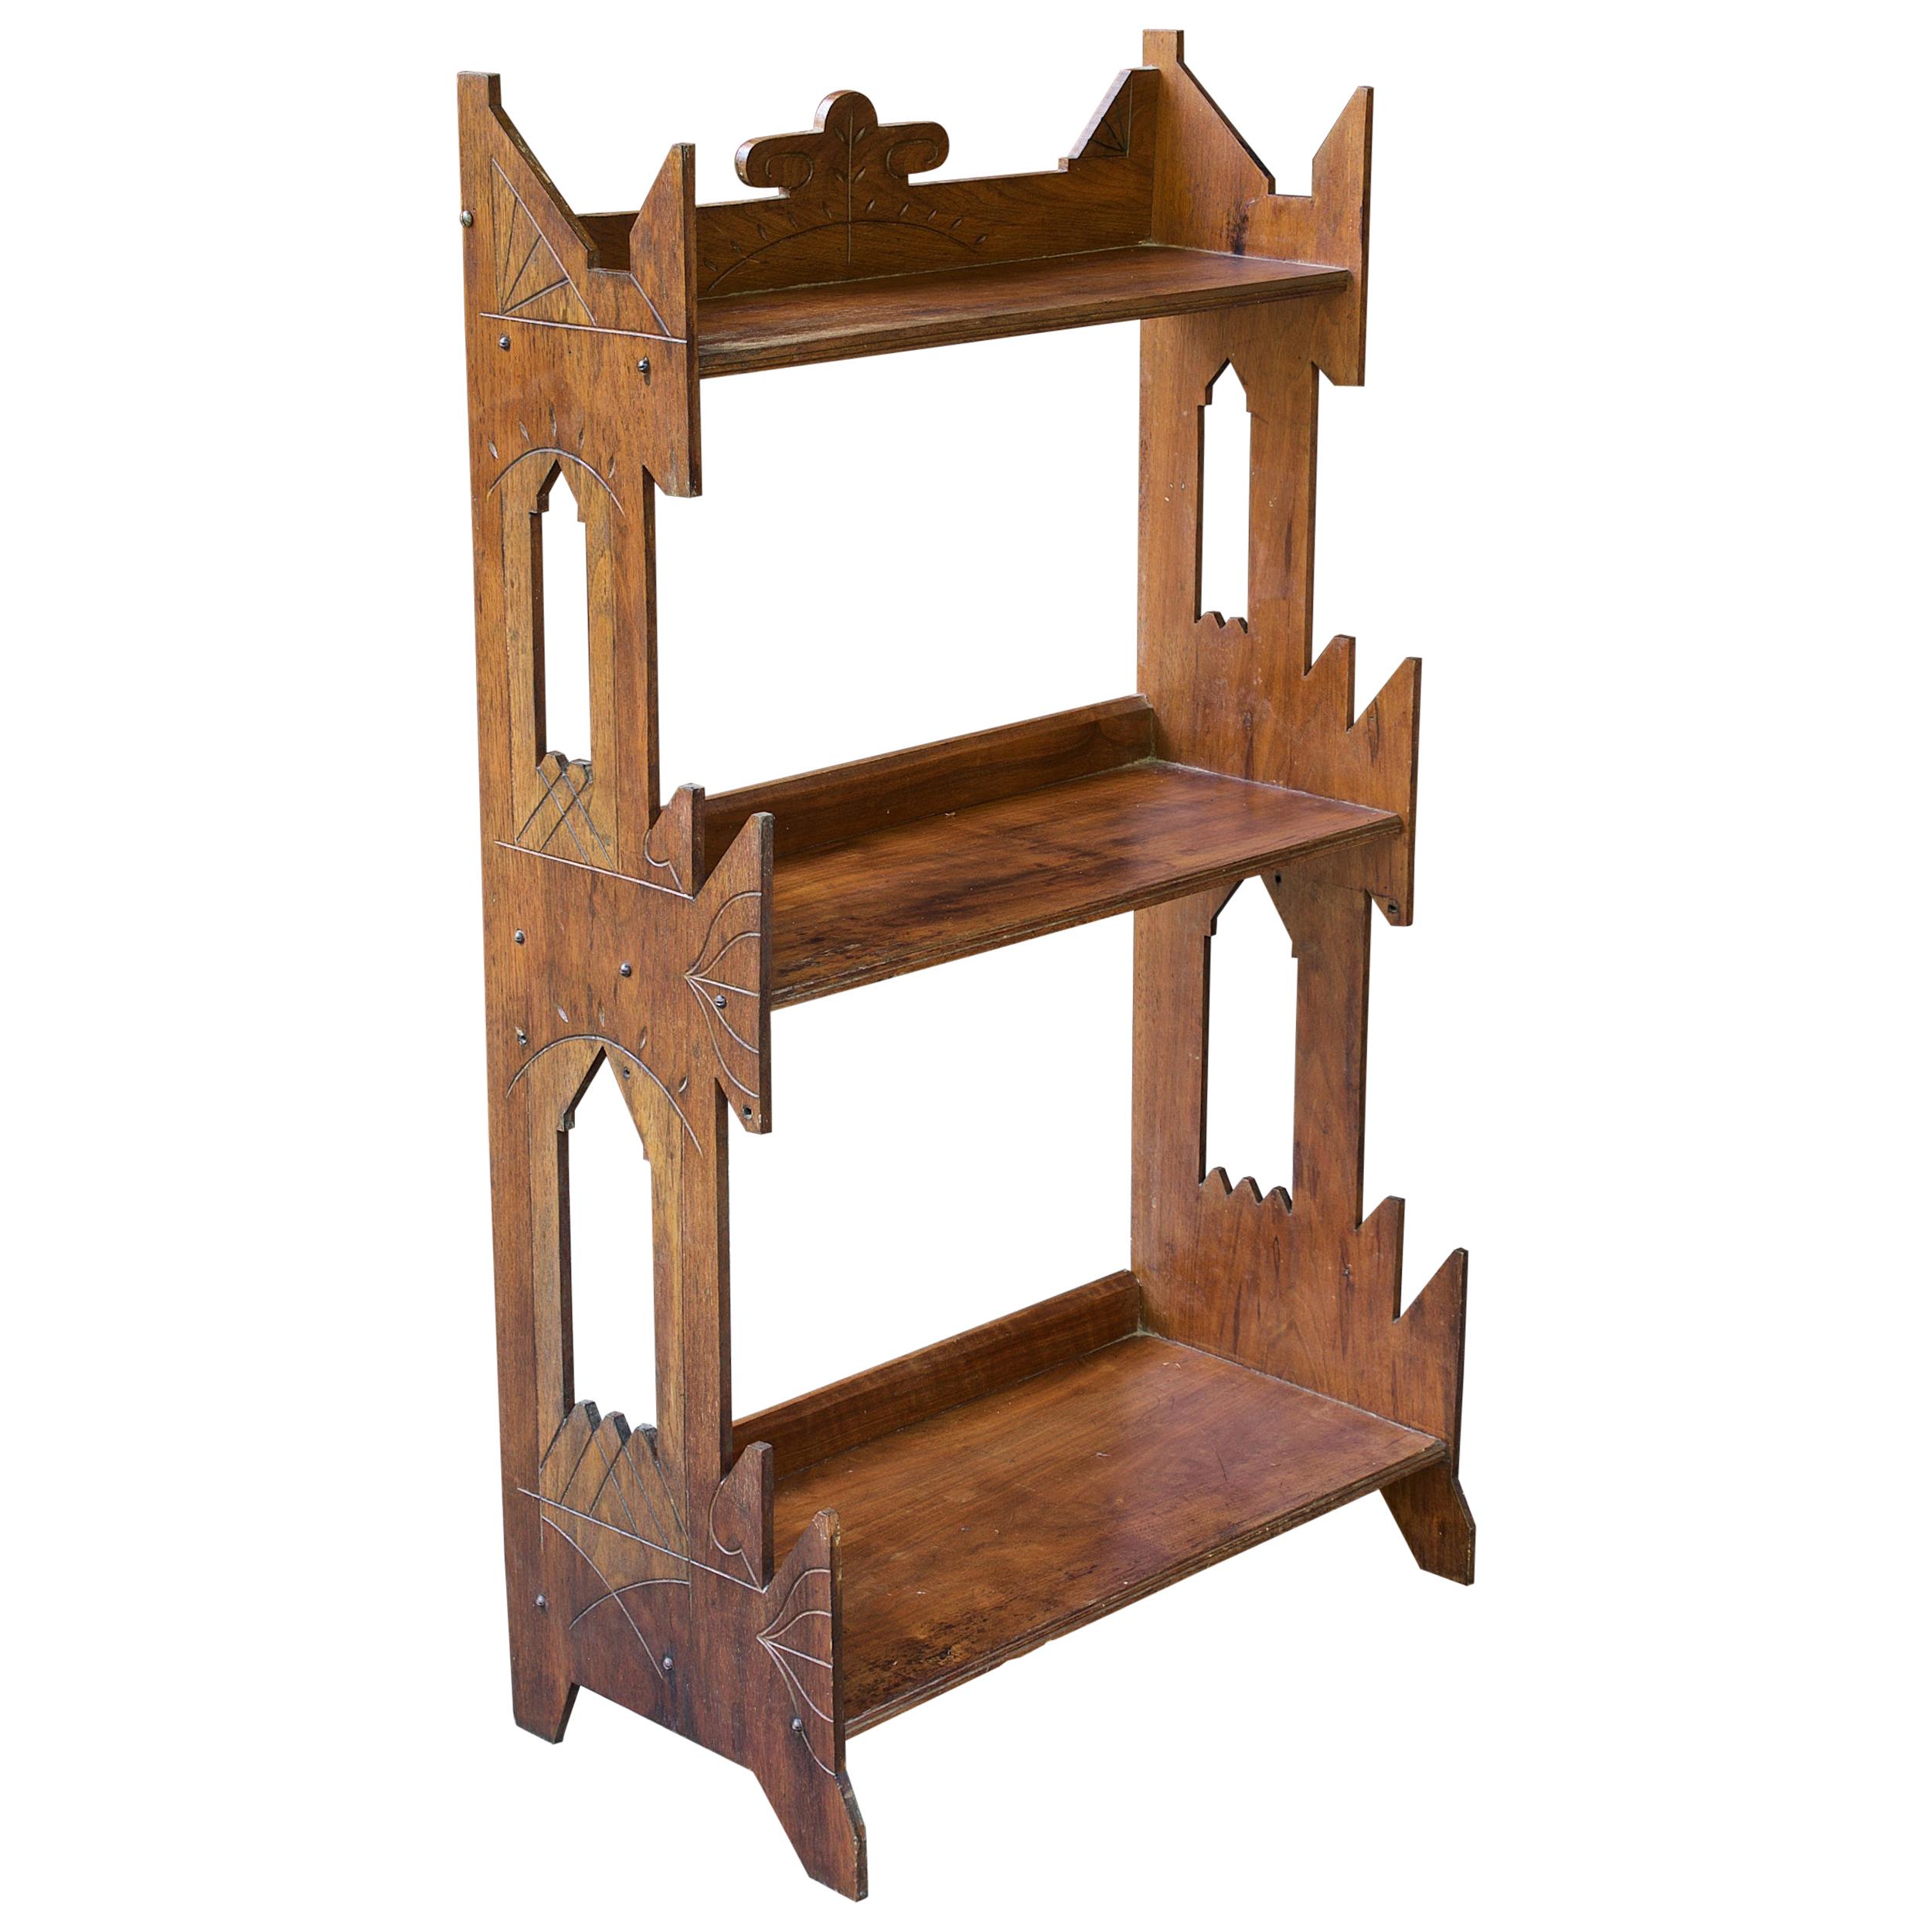 1900s American Craftsman Architecture Carved Tiered Book Shelf Art Craft Display For Sale